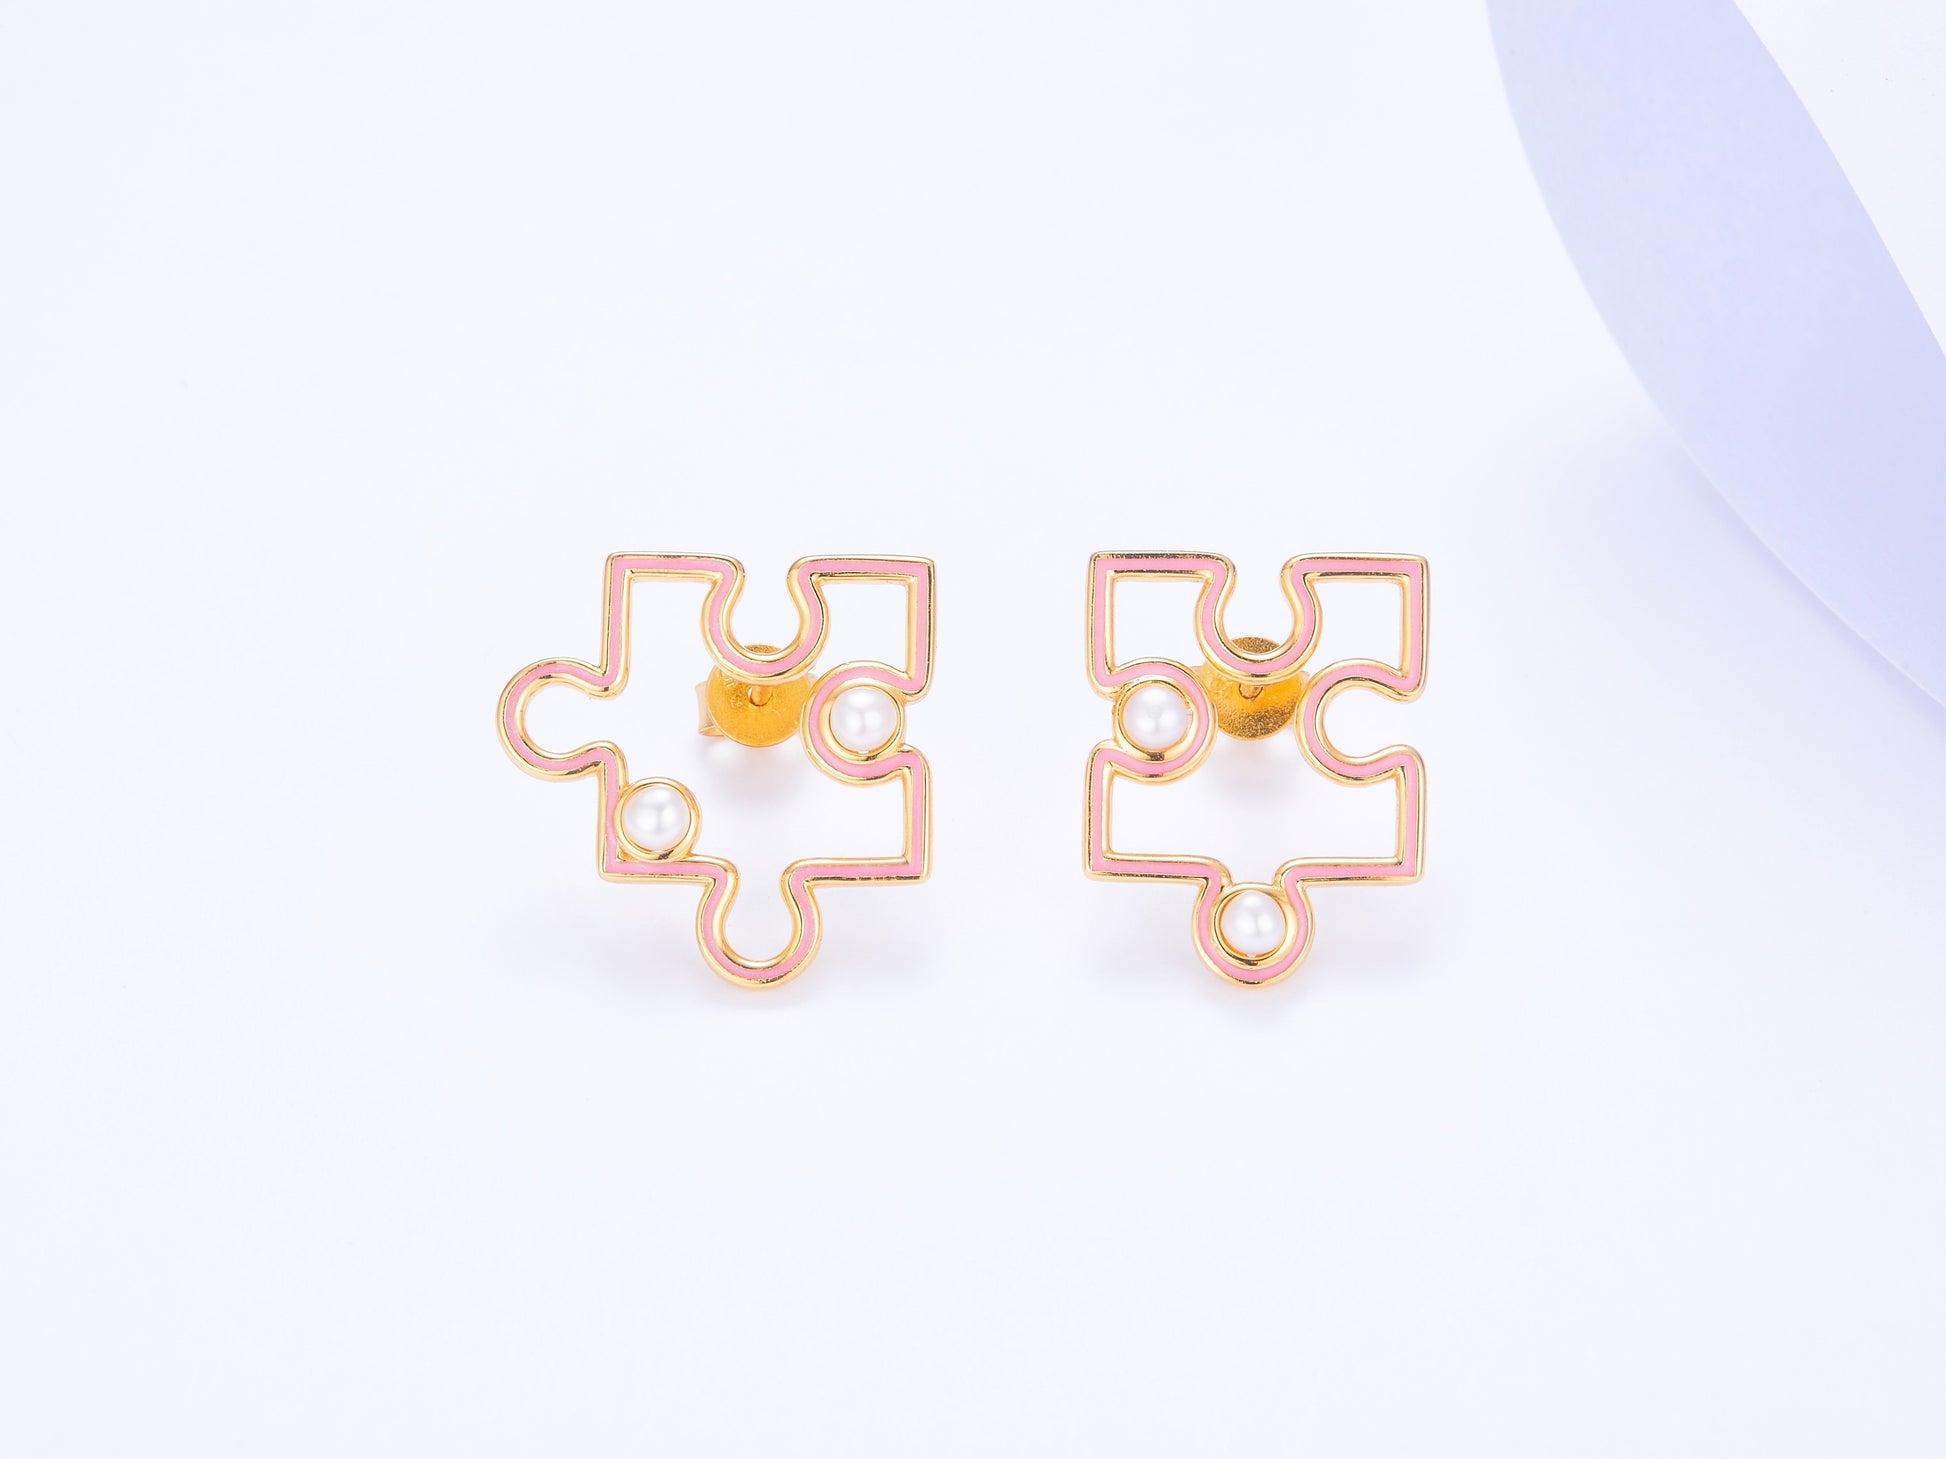 Golden Puzzle Enamel with Pearls Studs Earrings for Women